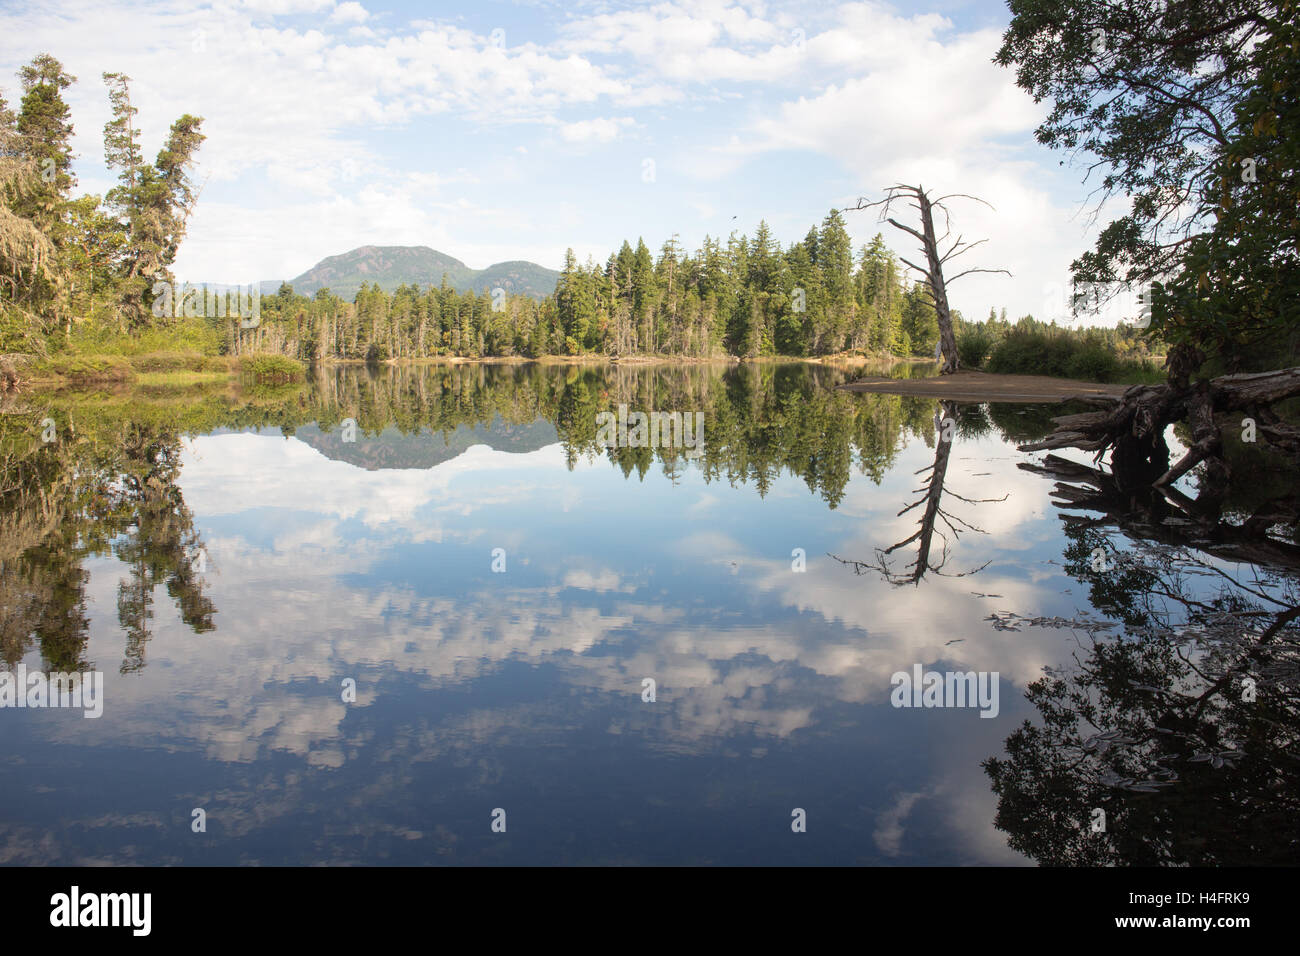 Landscape clouds reflecting on Spider lake with the bare tree, nature inspiration, Vancouver Island Stock Photo